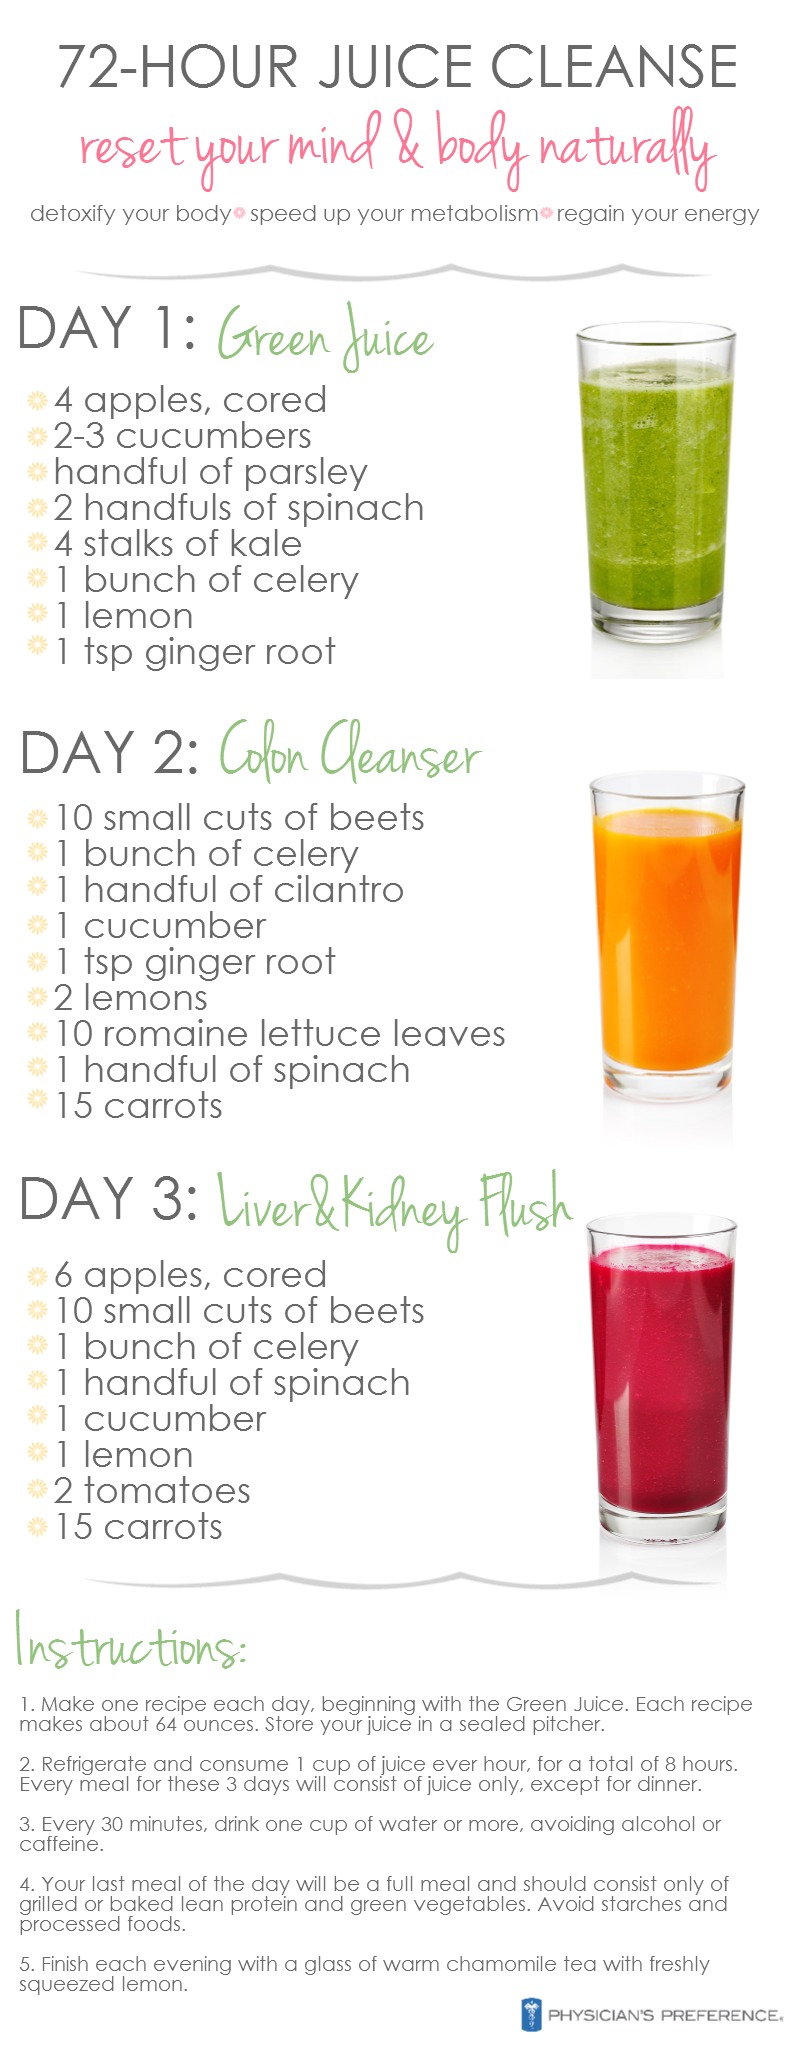 Reset Your Mind And Body With This 72-Hour Juice Cleanse ...